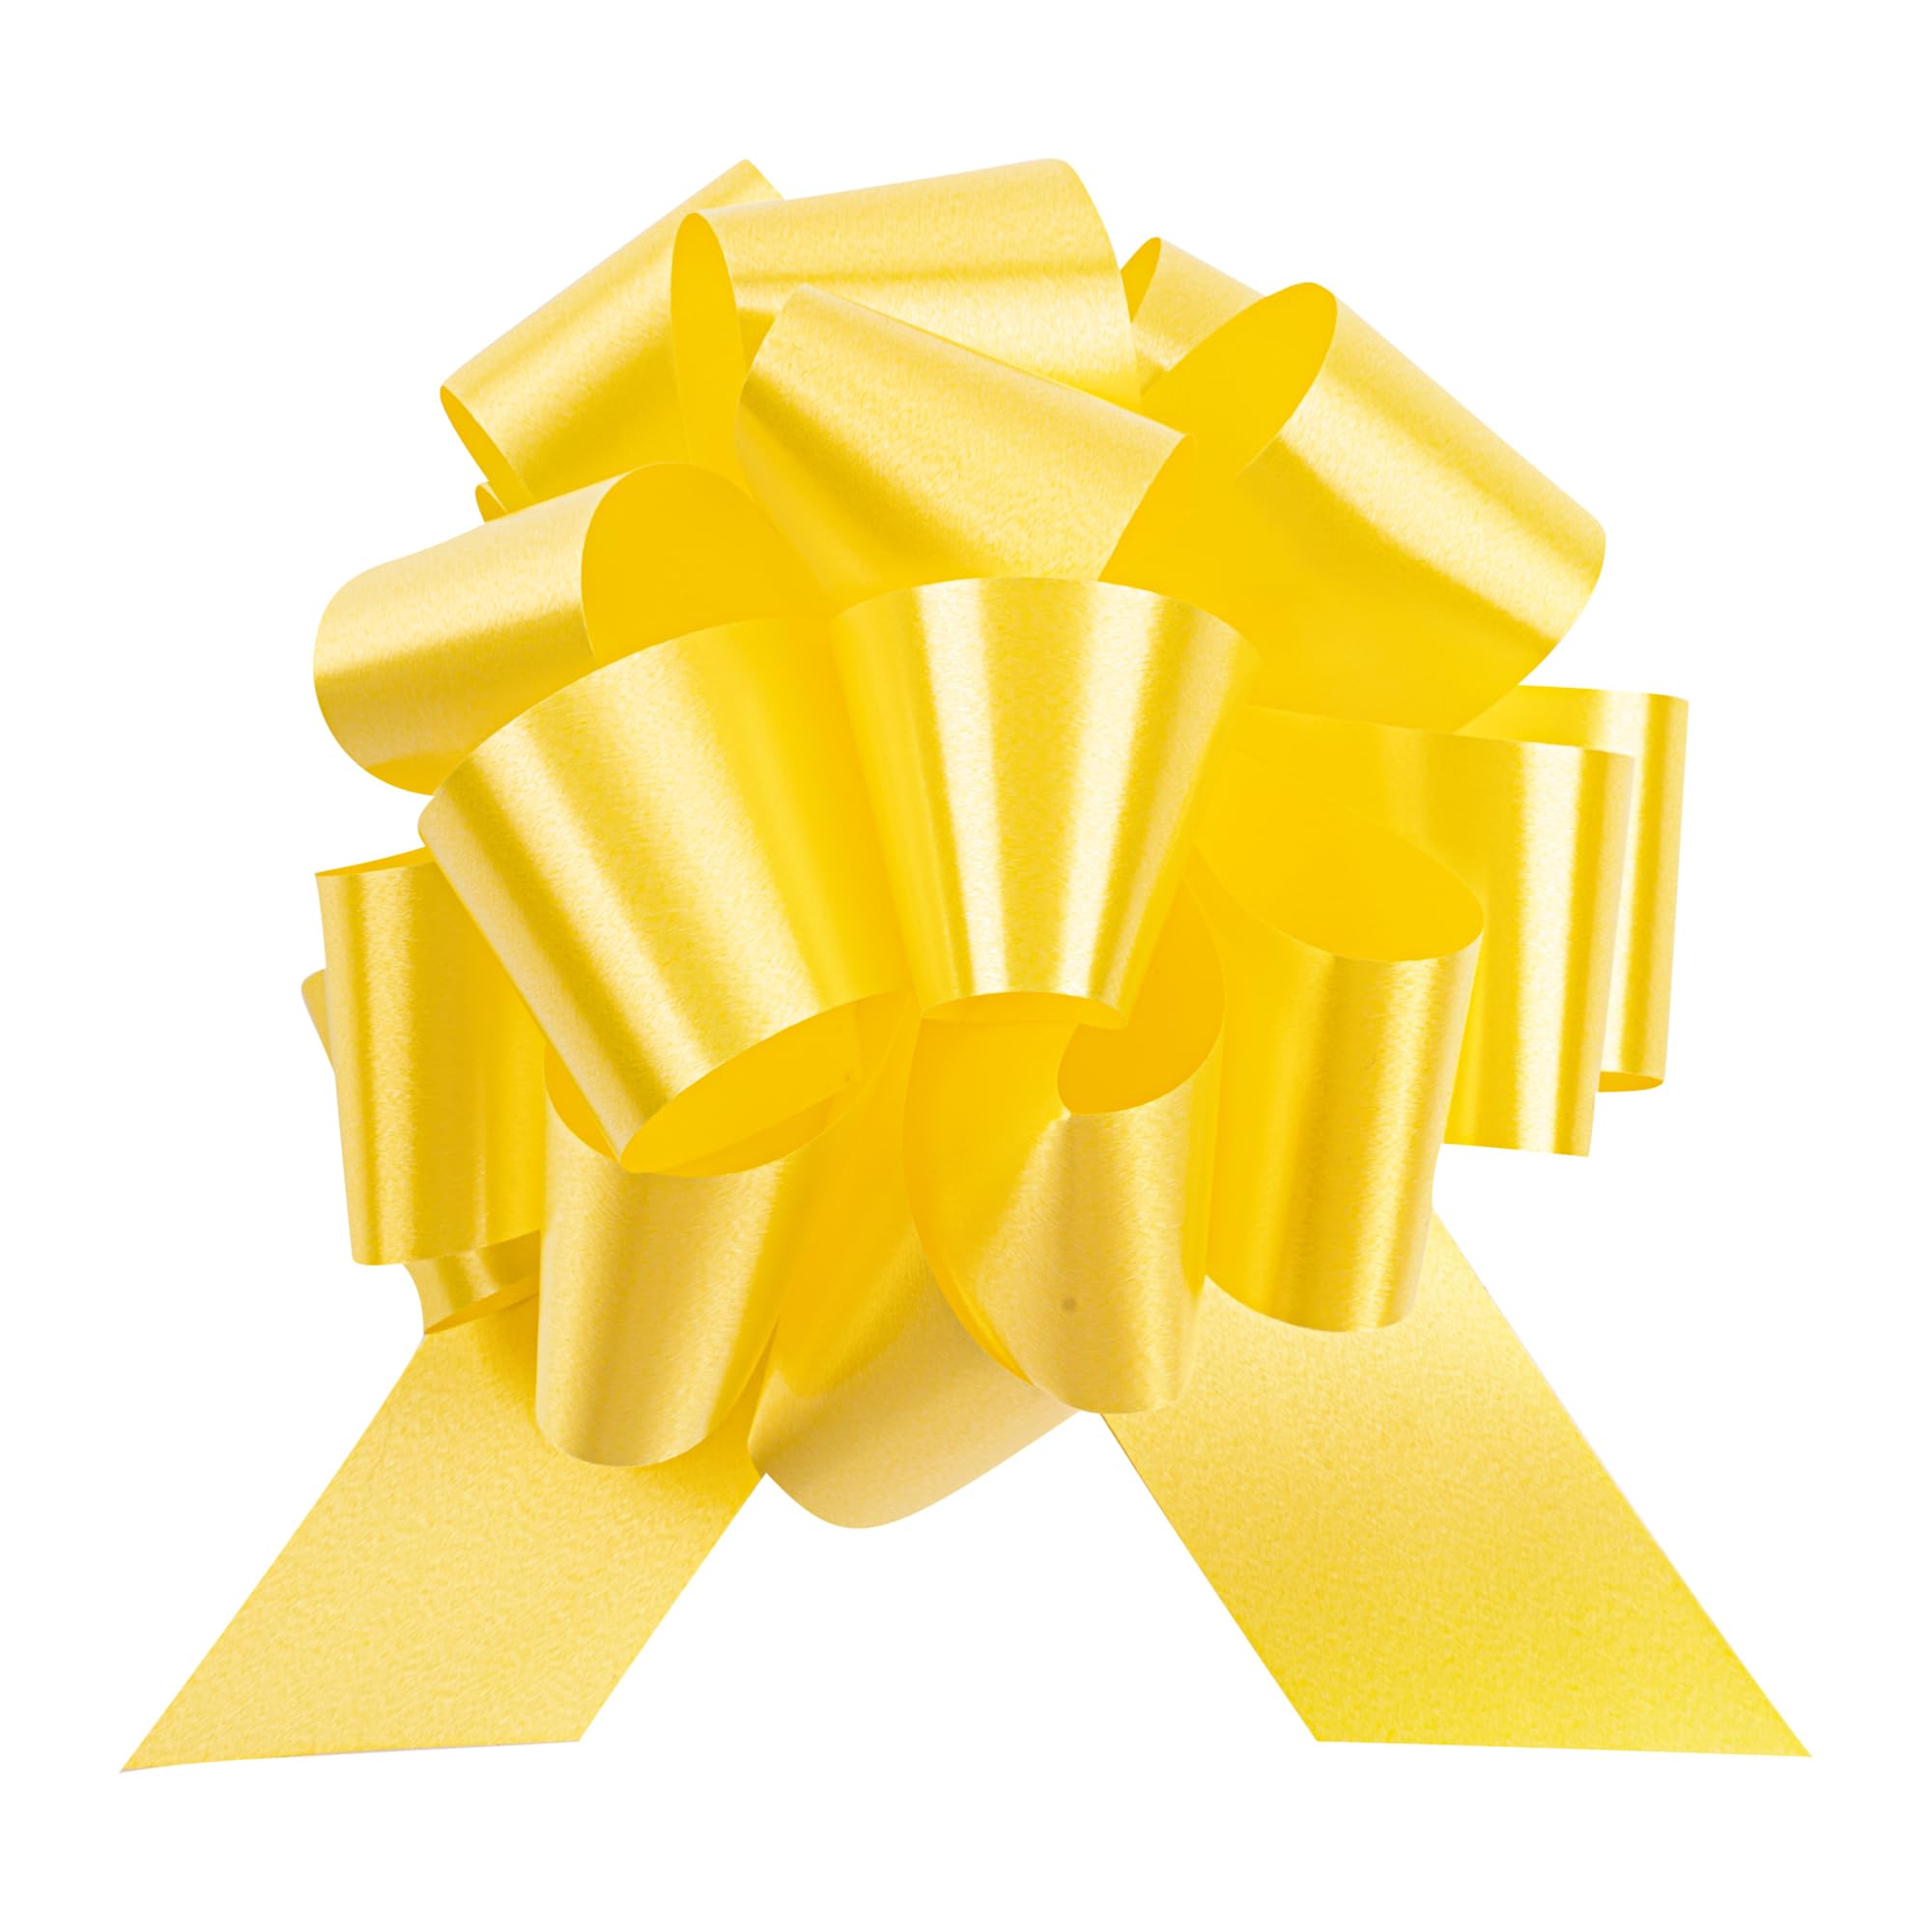 Gift Tek 5.5 Inch Ribbon Pull Bows, 10 Satin Pull Bows - 20 Loops, Instant, Yellow Plastic Flower Bows For Gifts, Large, Instant Bows, For Wedding Gift Baskets, Wraps - Restaurantware